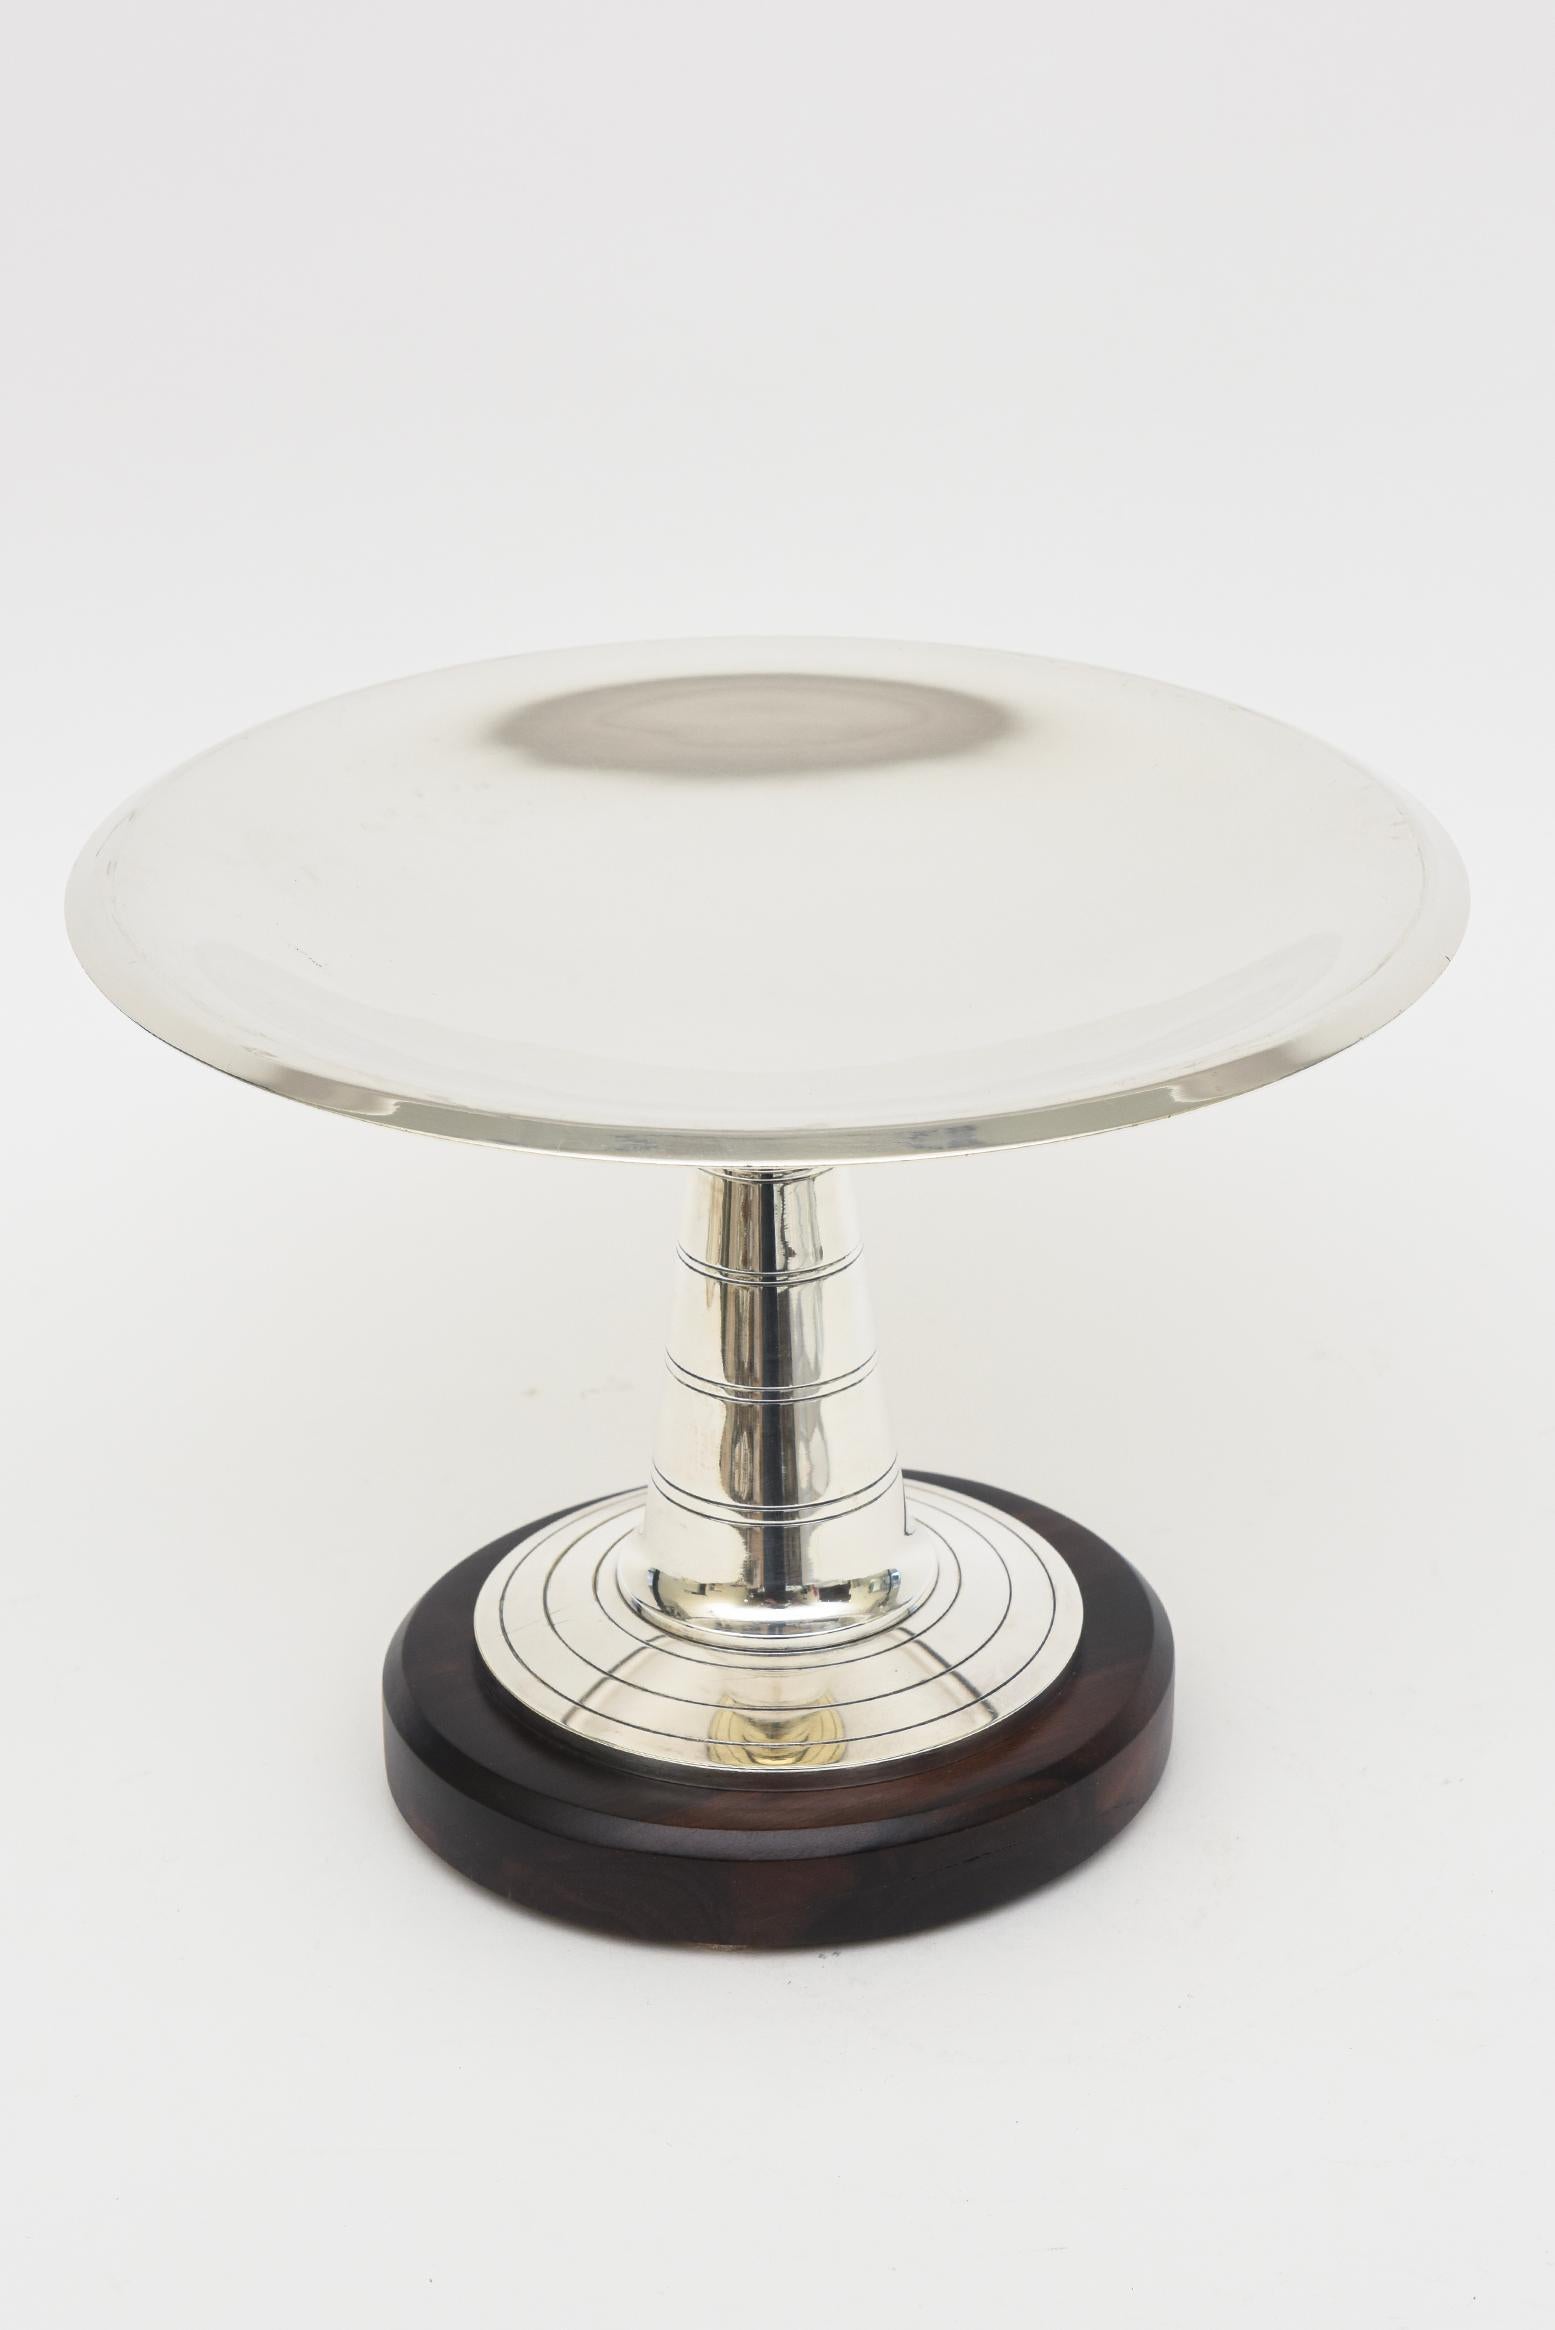 This stunning and substantial French Art Deco silver- plate and rosewood base pedestal bowl or serving piece has concentric lines at the column and top of the base before the rosewood base. It was acquired by us in Paris 25 years ago and has